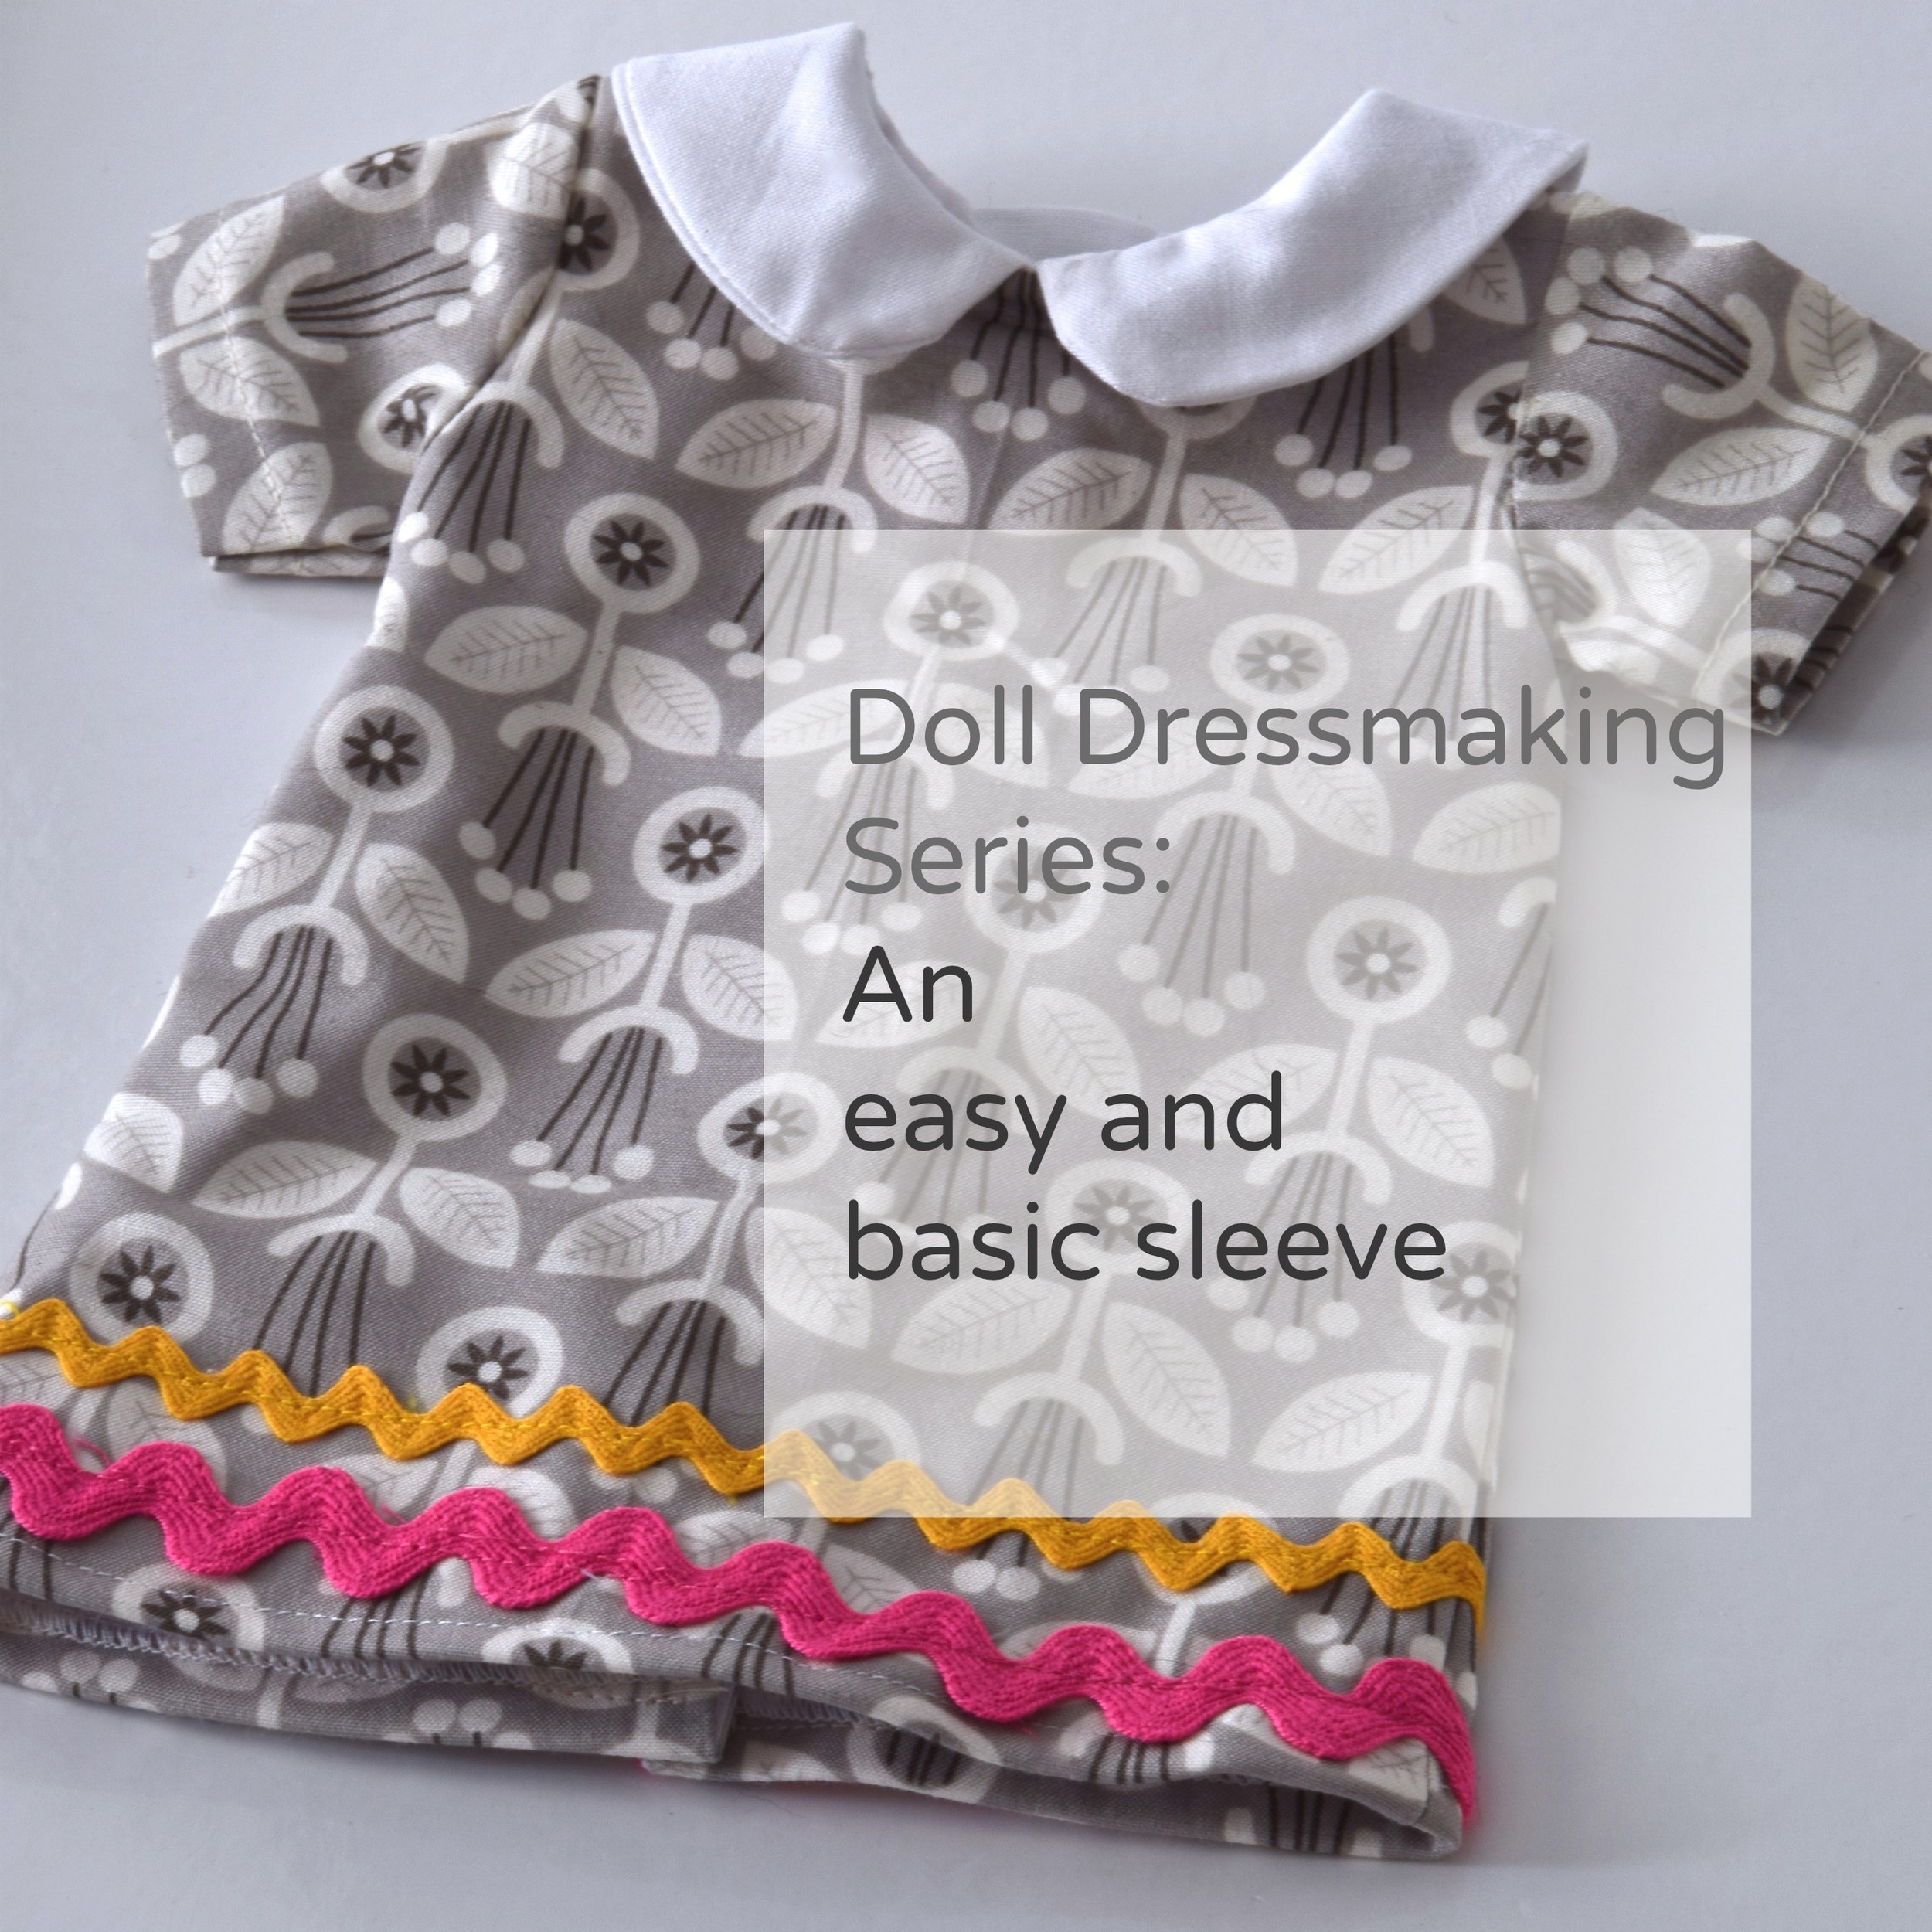 Beginner Dressmaking and Sewing Patterns